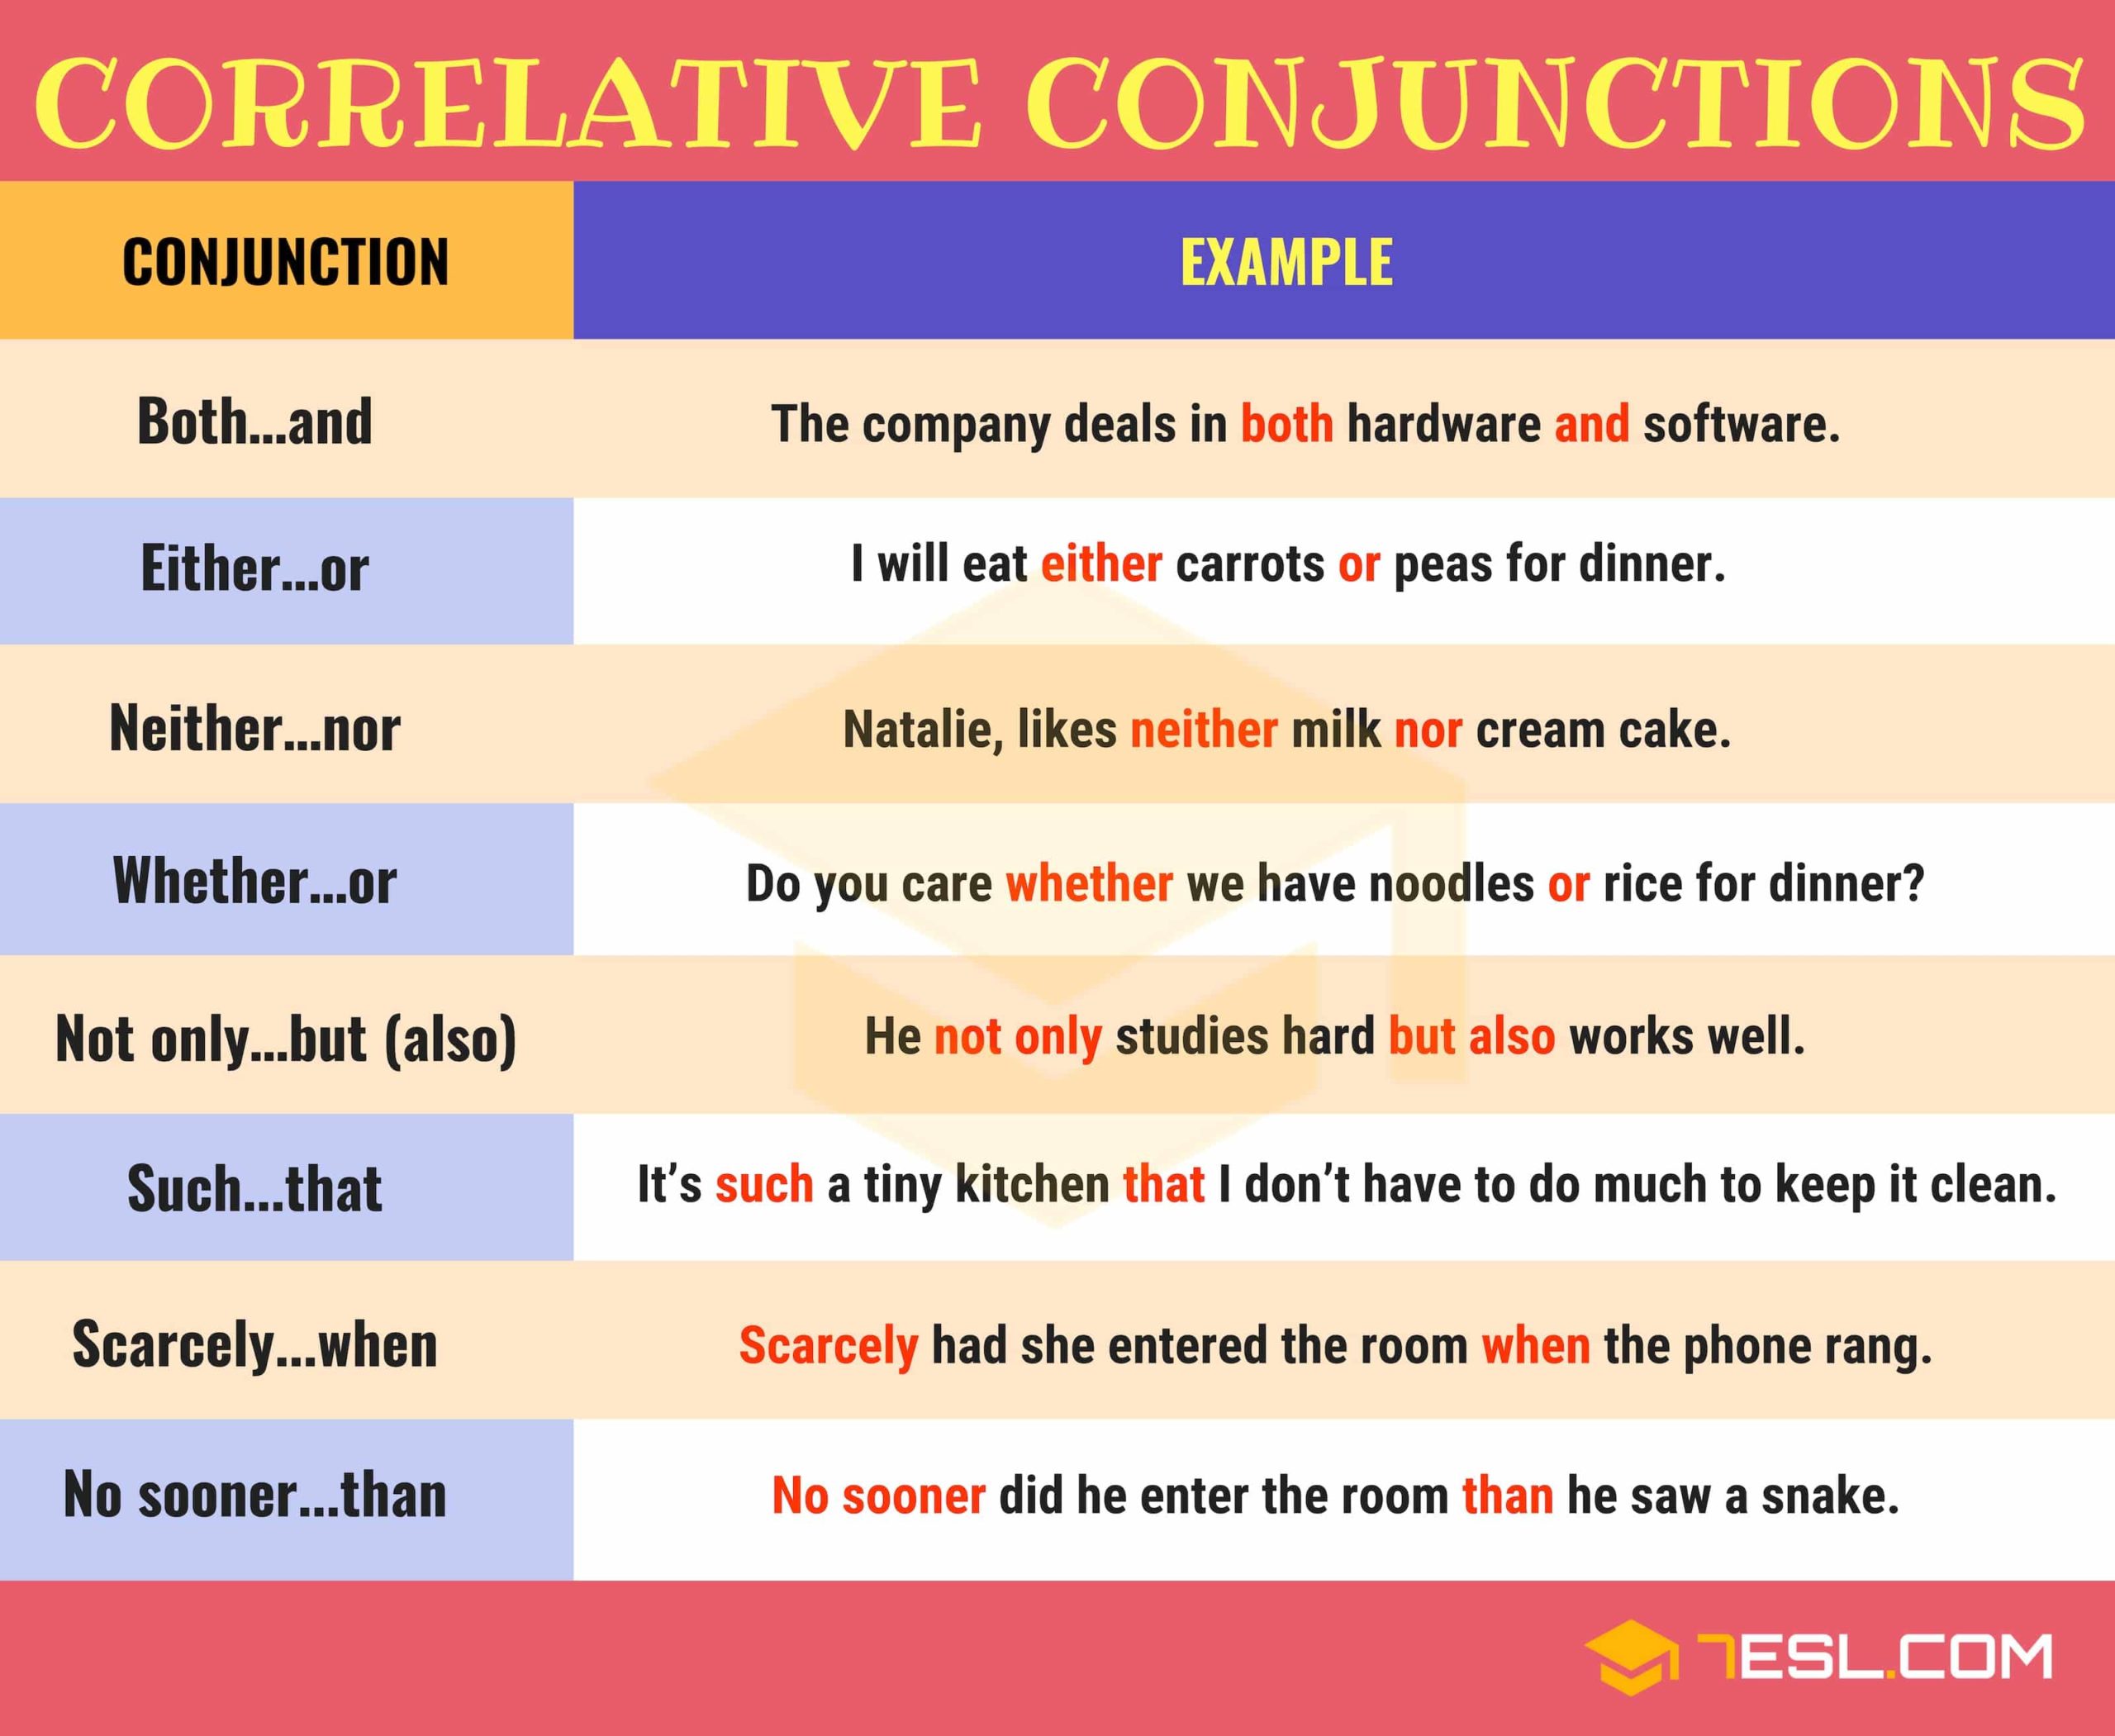 What Are 5 Examples Of Correlative Conjunctions